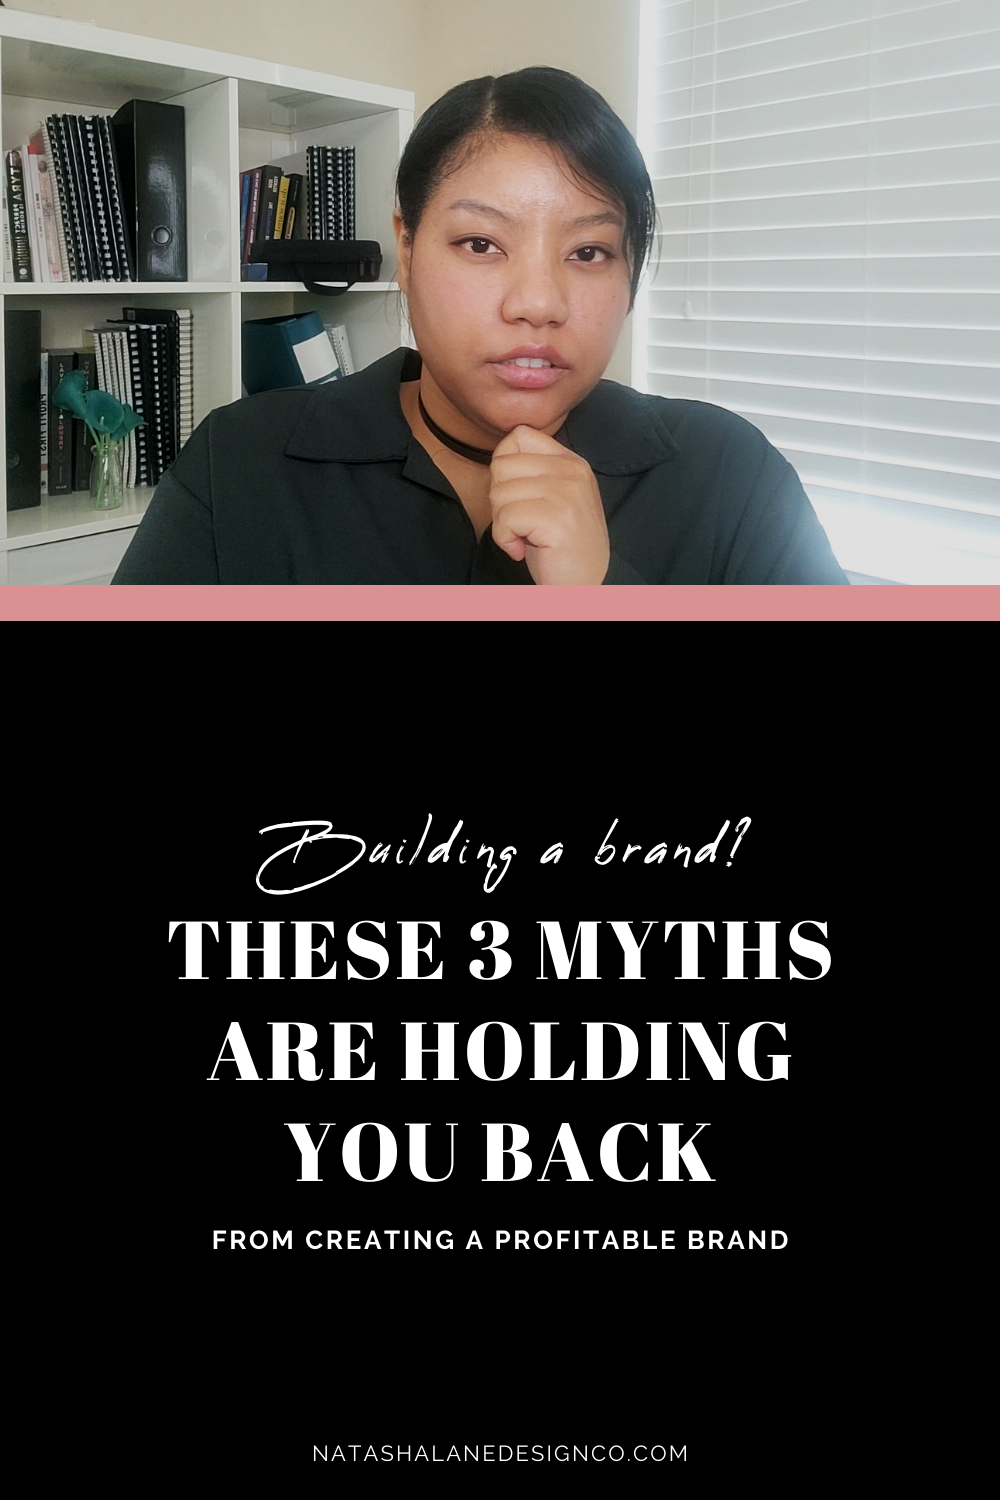 Building a brand_ These 3 myths are holding you back from creating a profitable brand